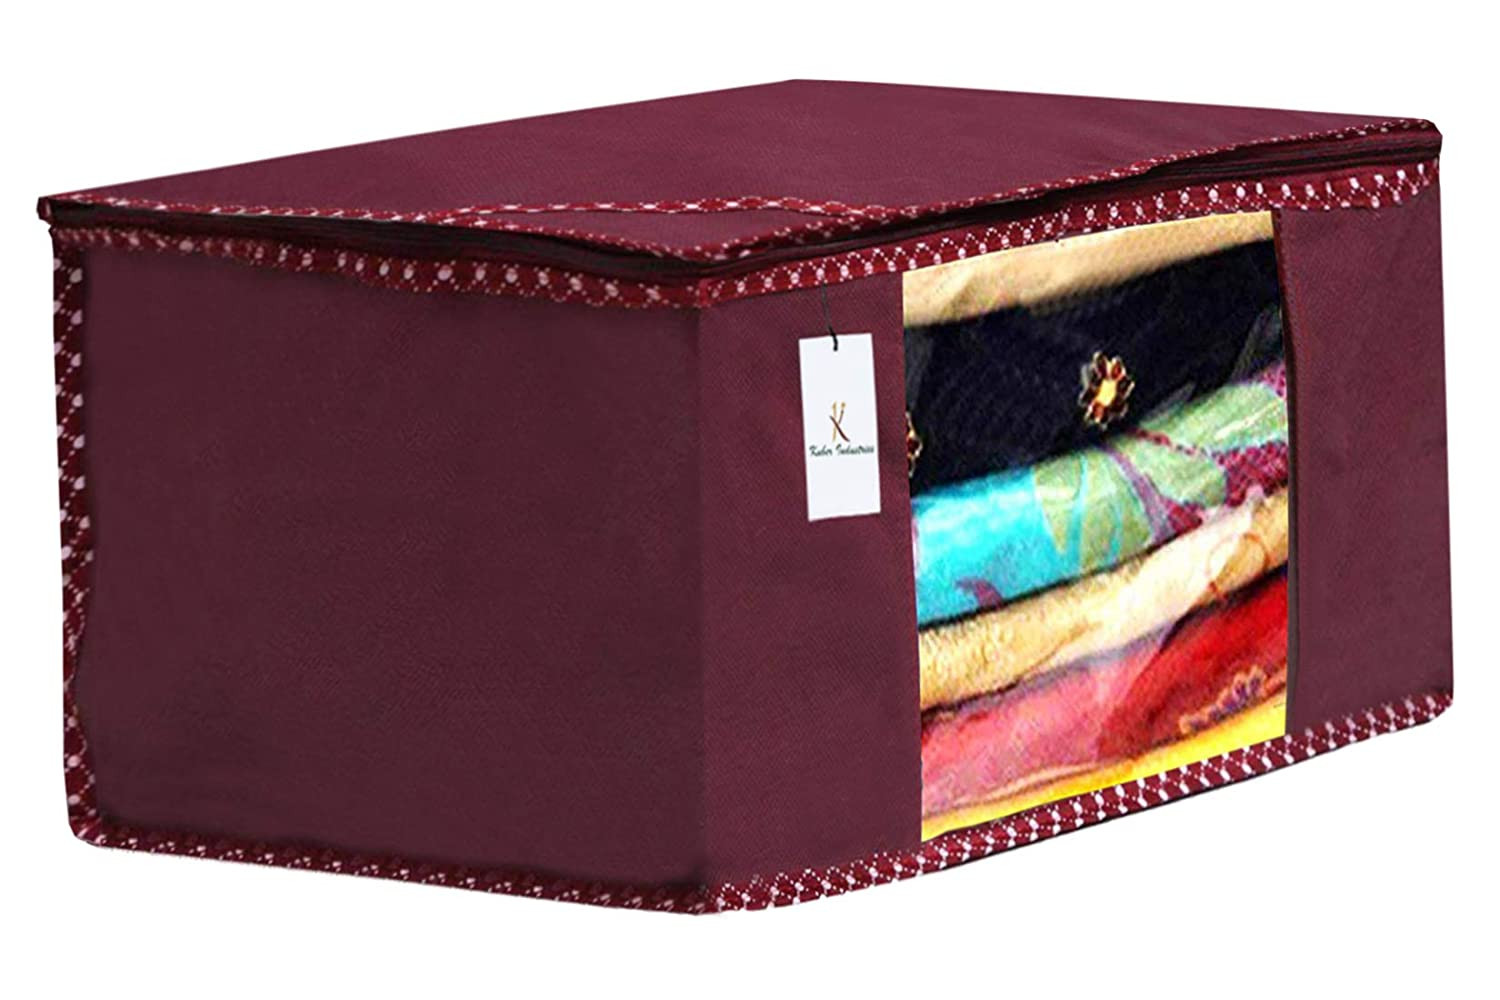 Kuber Industries Non Woven Saree Cover/Cloth Wardrobe Organizer and Blouse Cover Combo Set (Maroon & Purple & Brown)